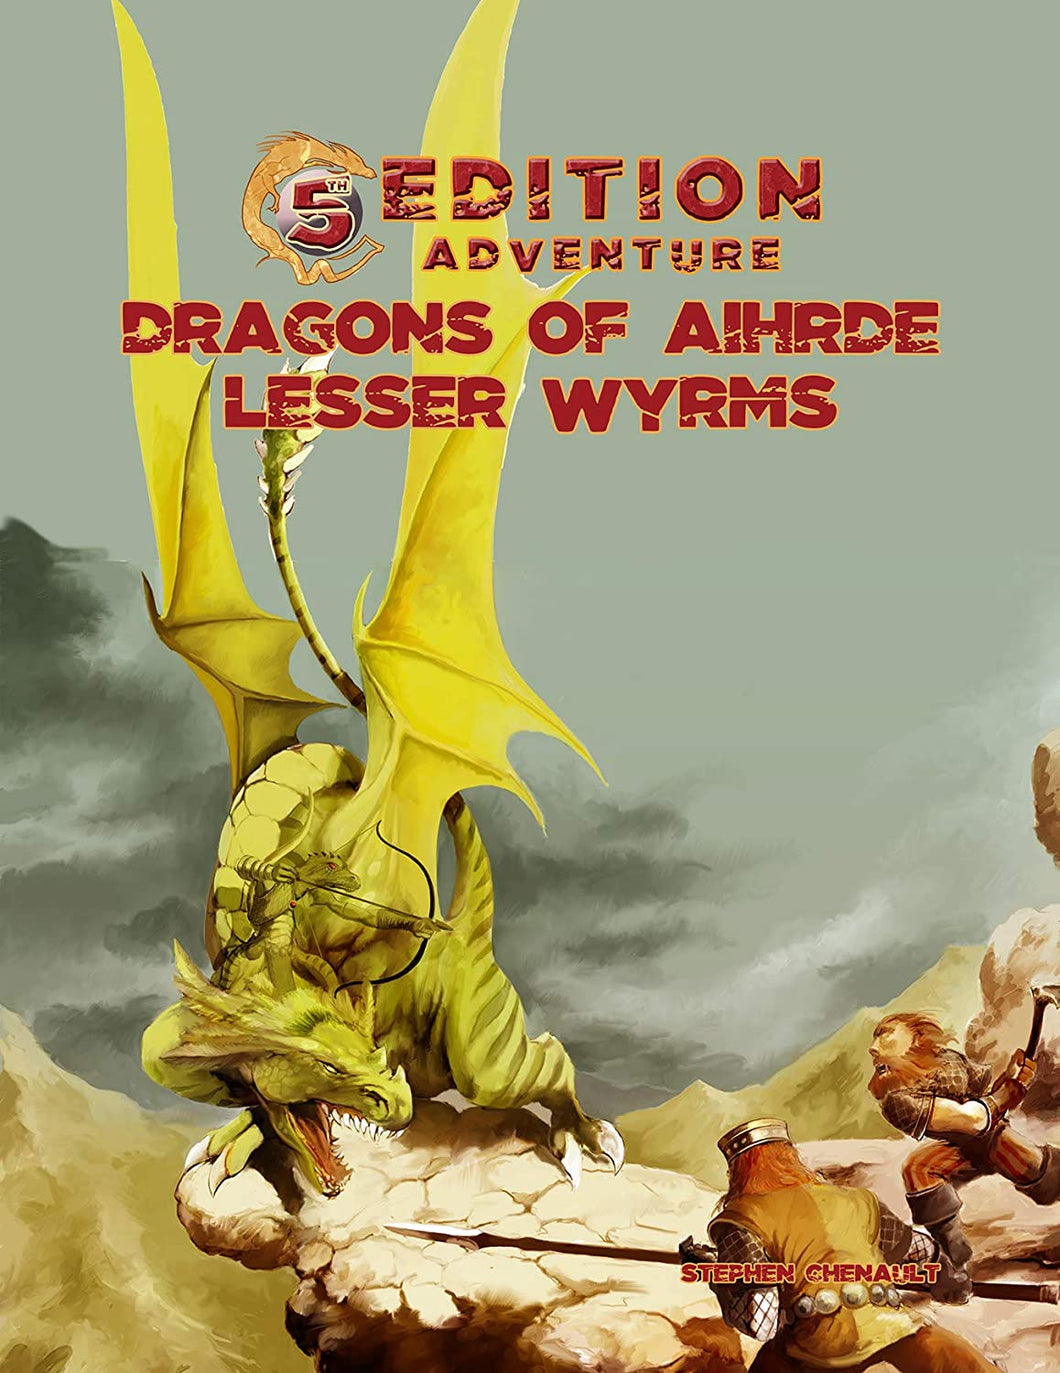 5th Edition : Adventure Dragons of Aihdre Lesser Wyrms